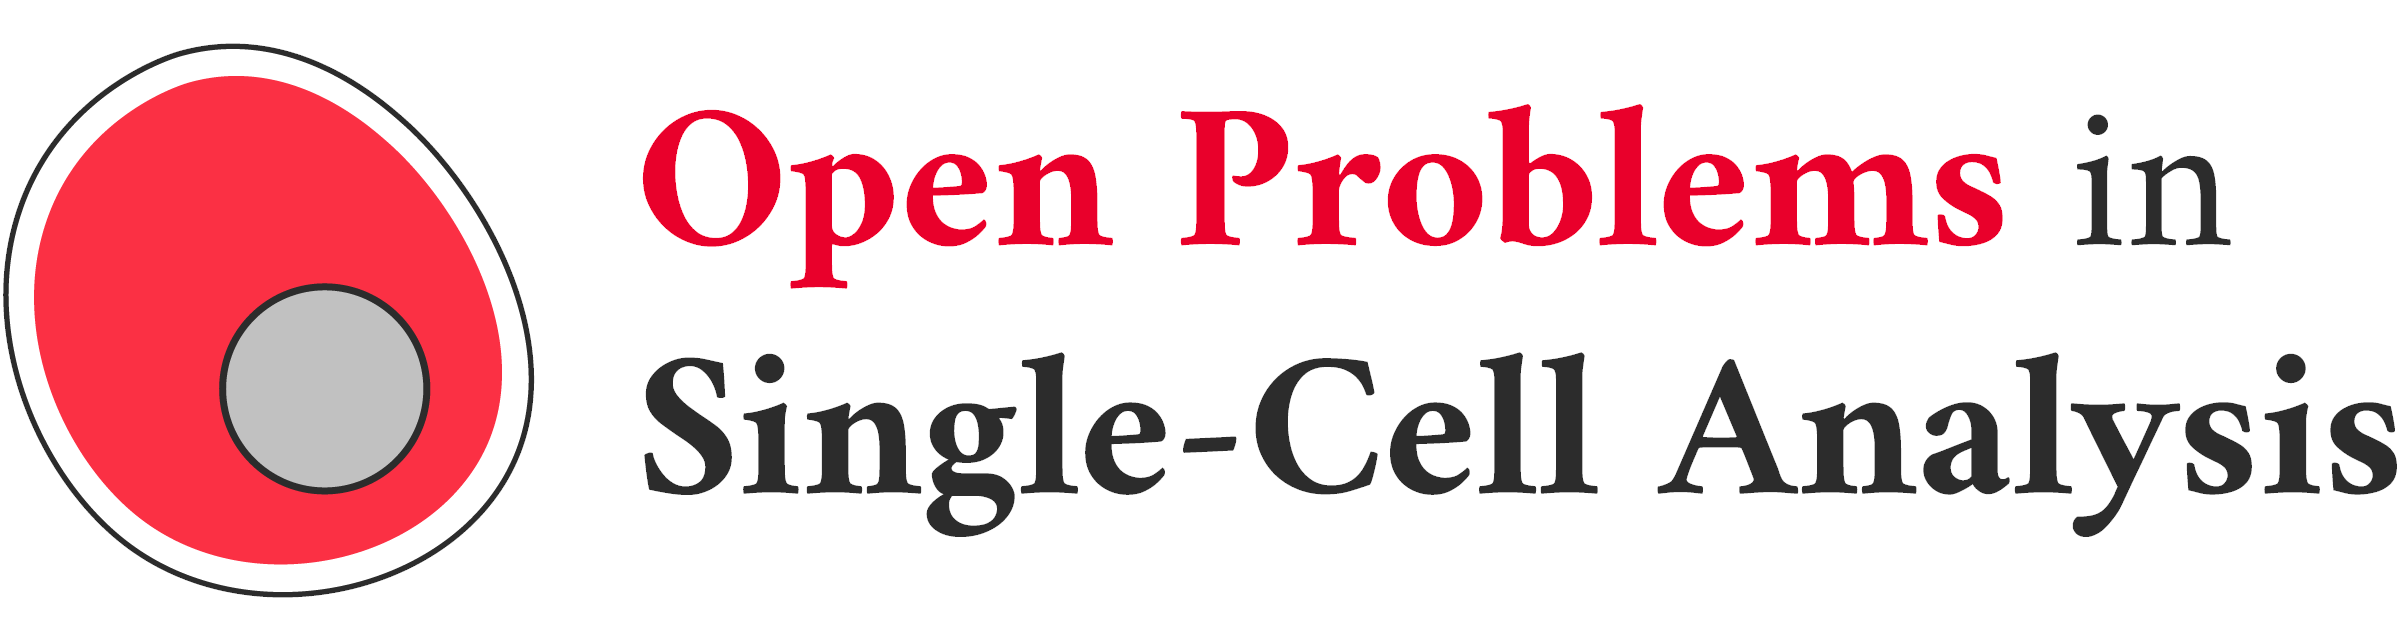 The Open Problems logo